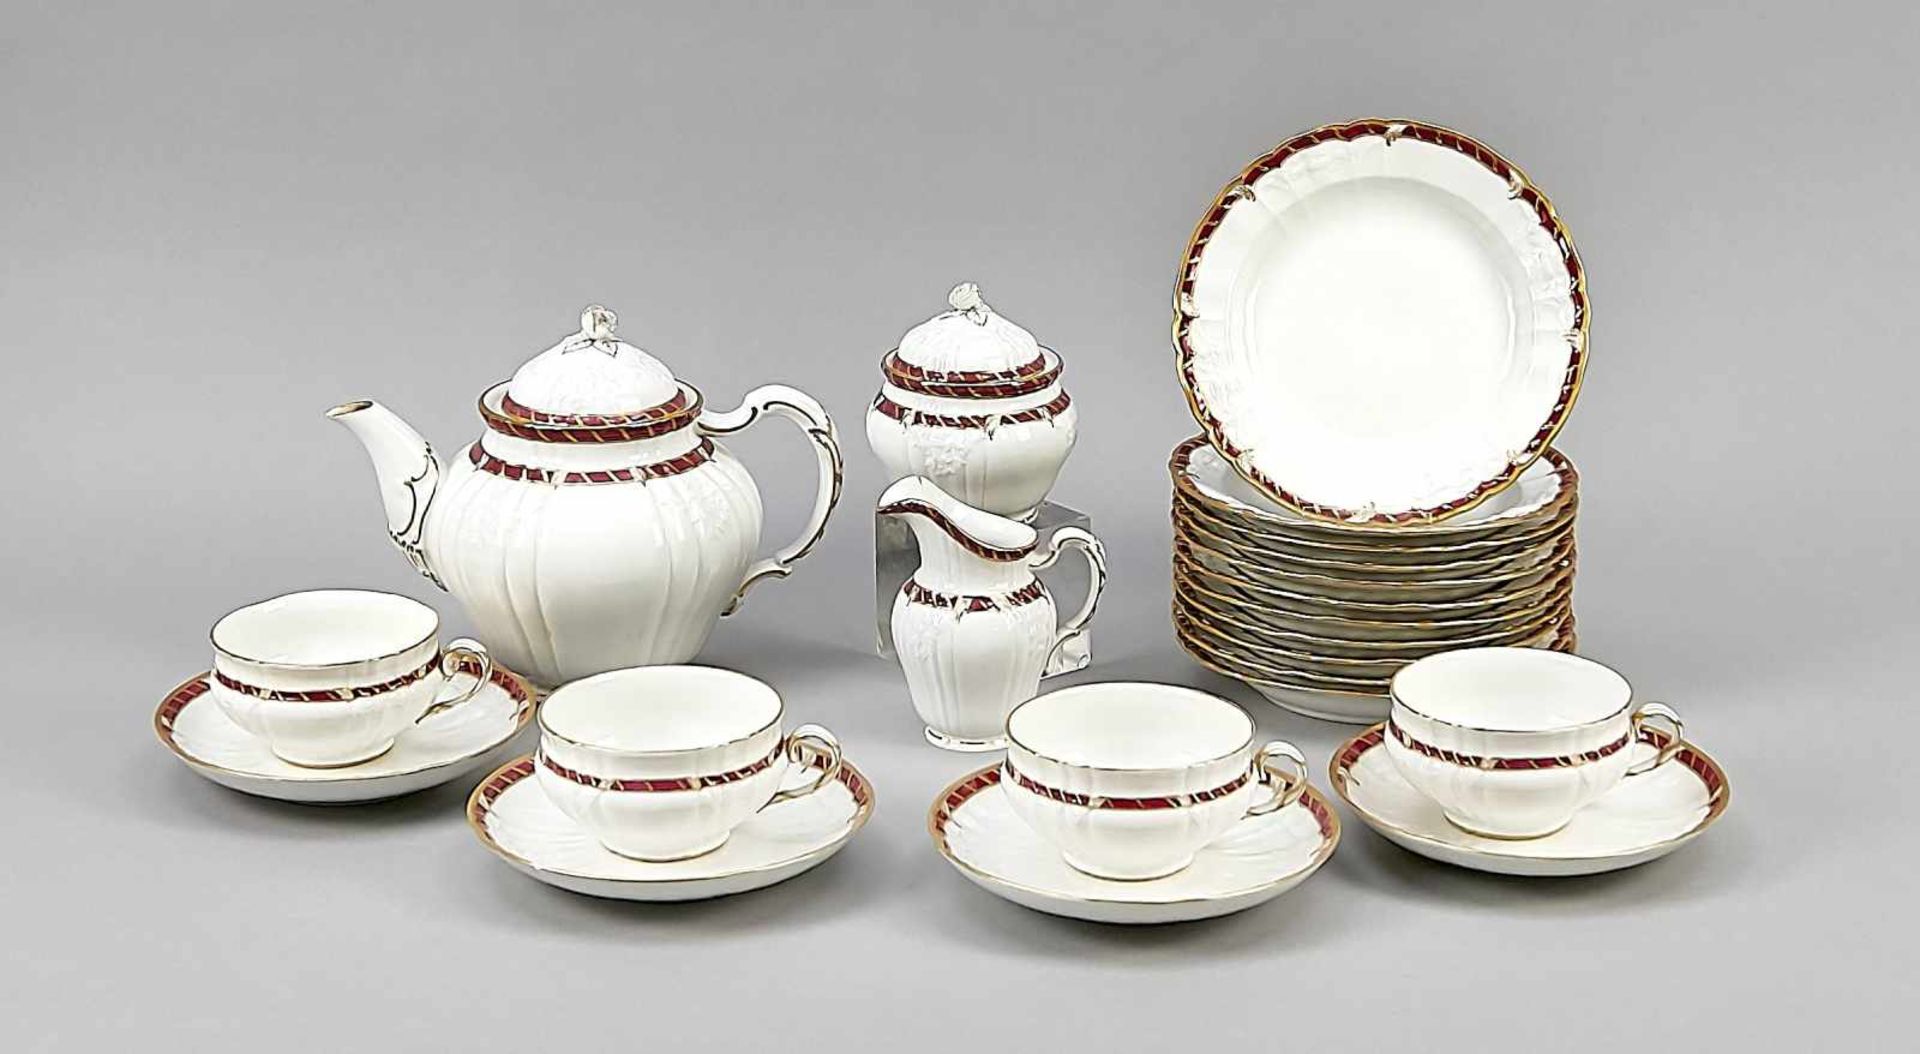 Tea set for 12 persons, 39 pcs., KPM Berlin, mark 1962-92, 1st and 2nd quality, painter'smark,